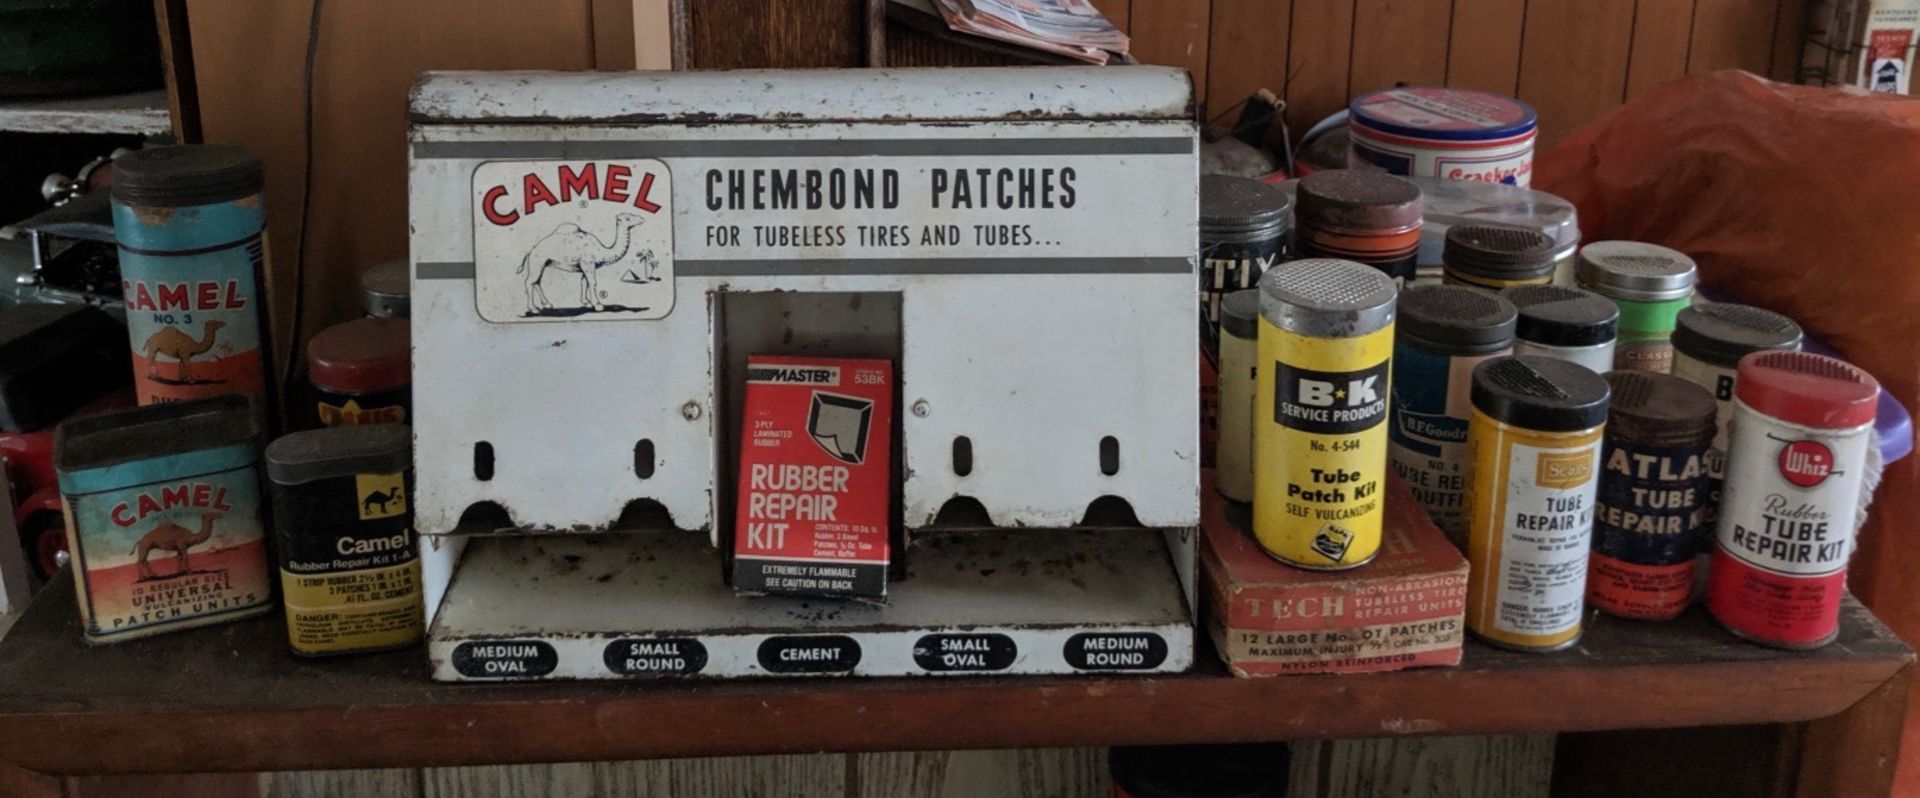 Camel Chembond Patches Display and Other Tube Repair Kits